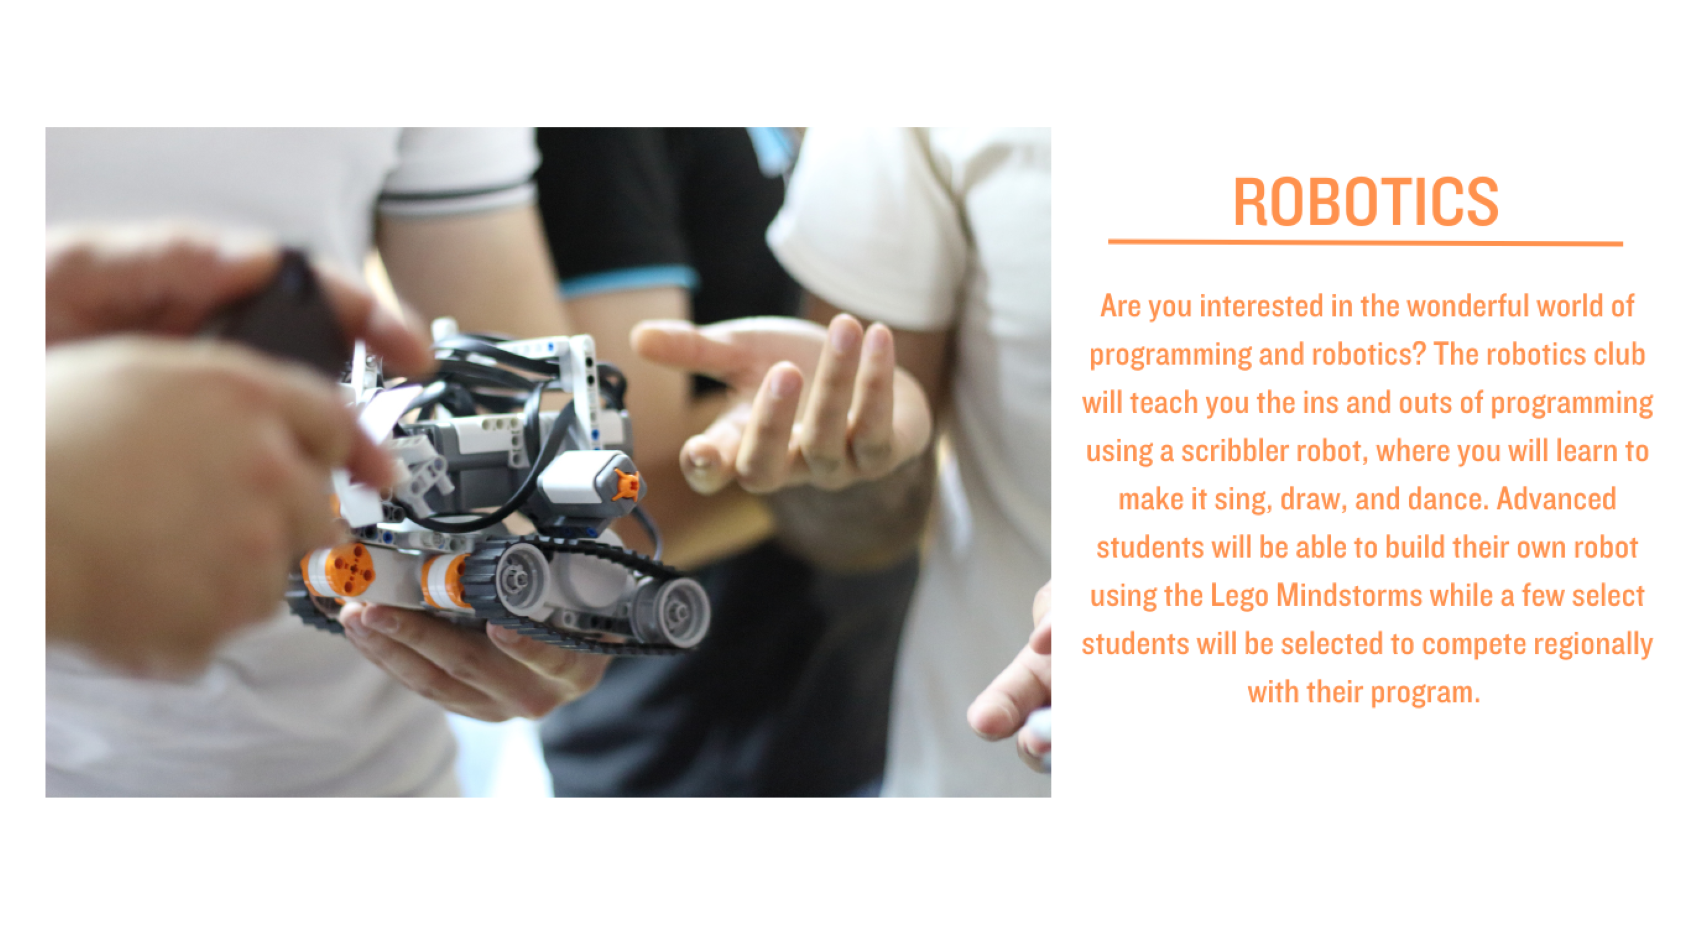 Robotics will teach you about programming. 